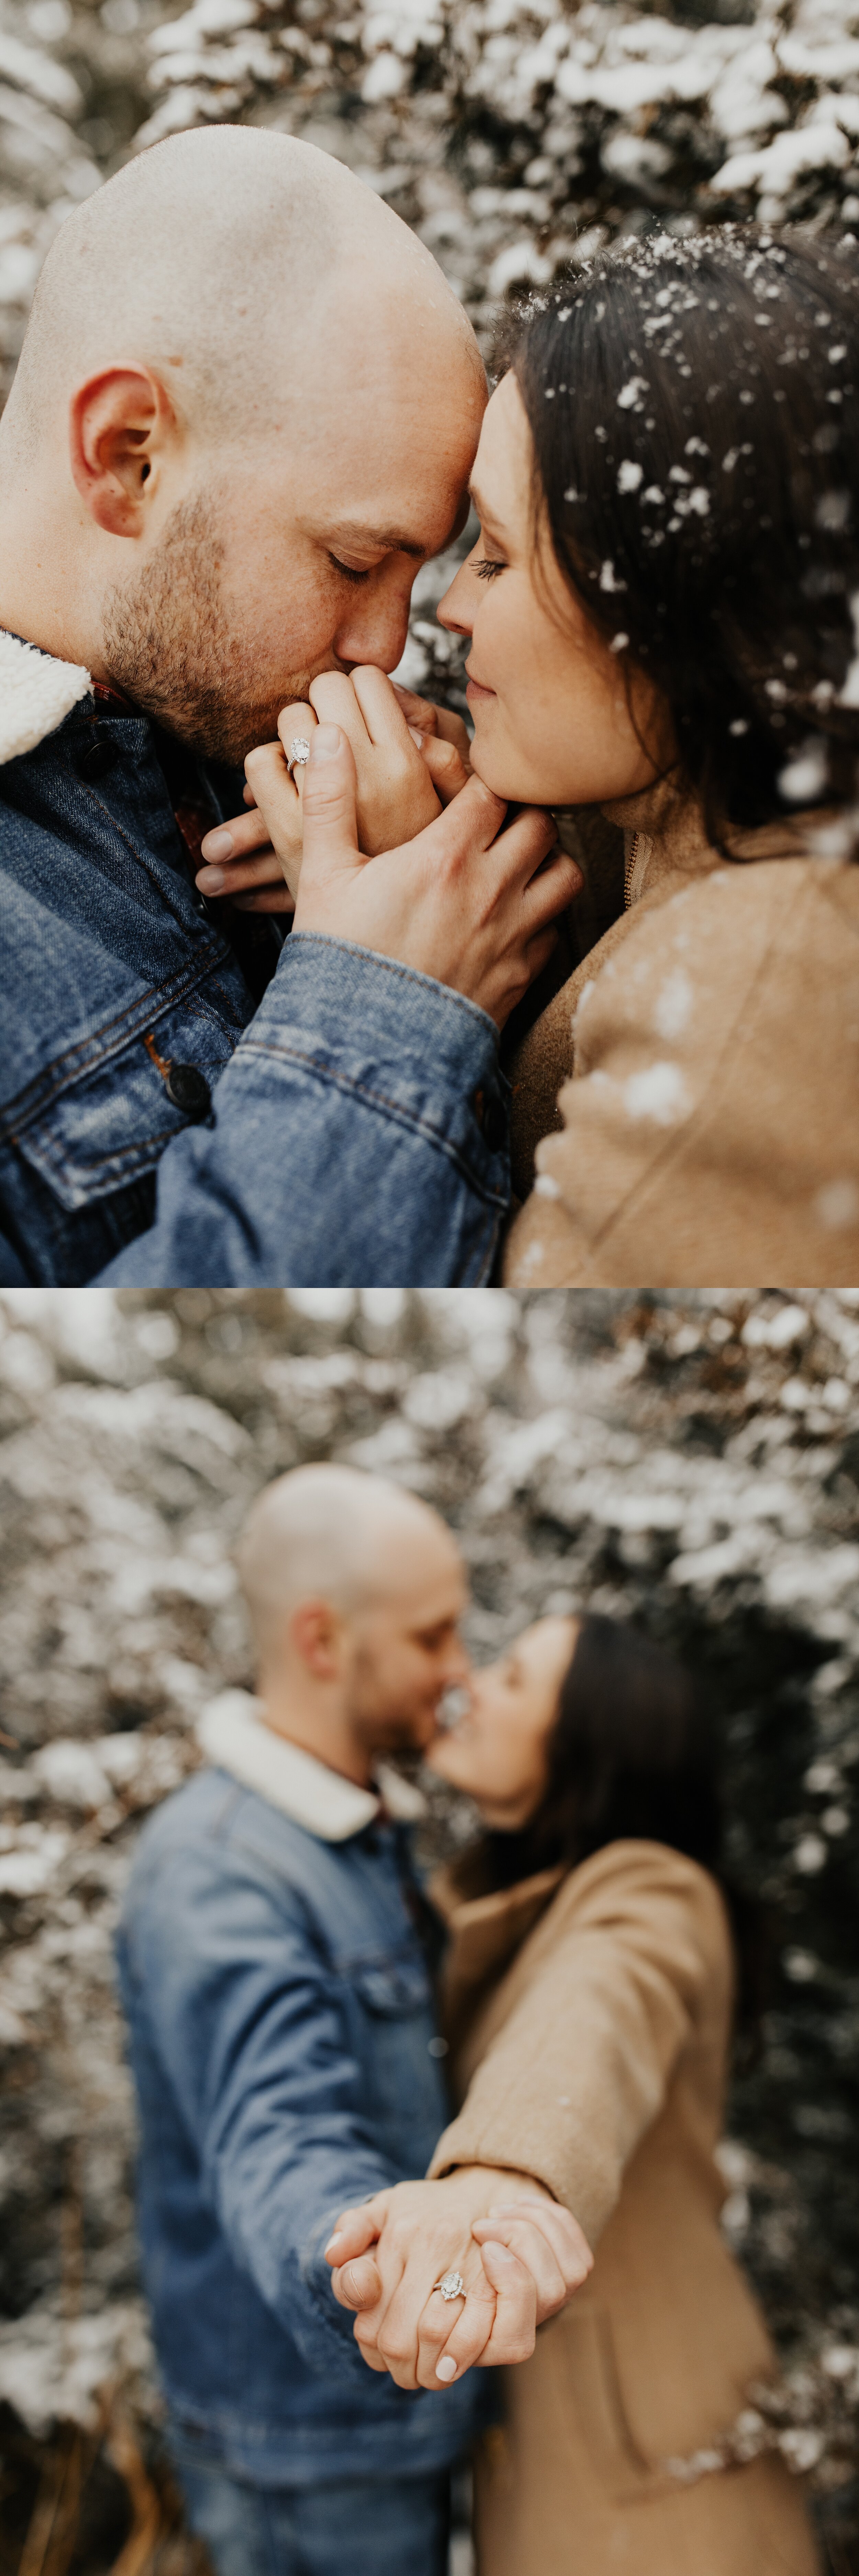 jessika-christine-photography-outdoor-engagement-couples-snow-adventurous-session (15).jpg